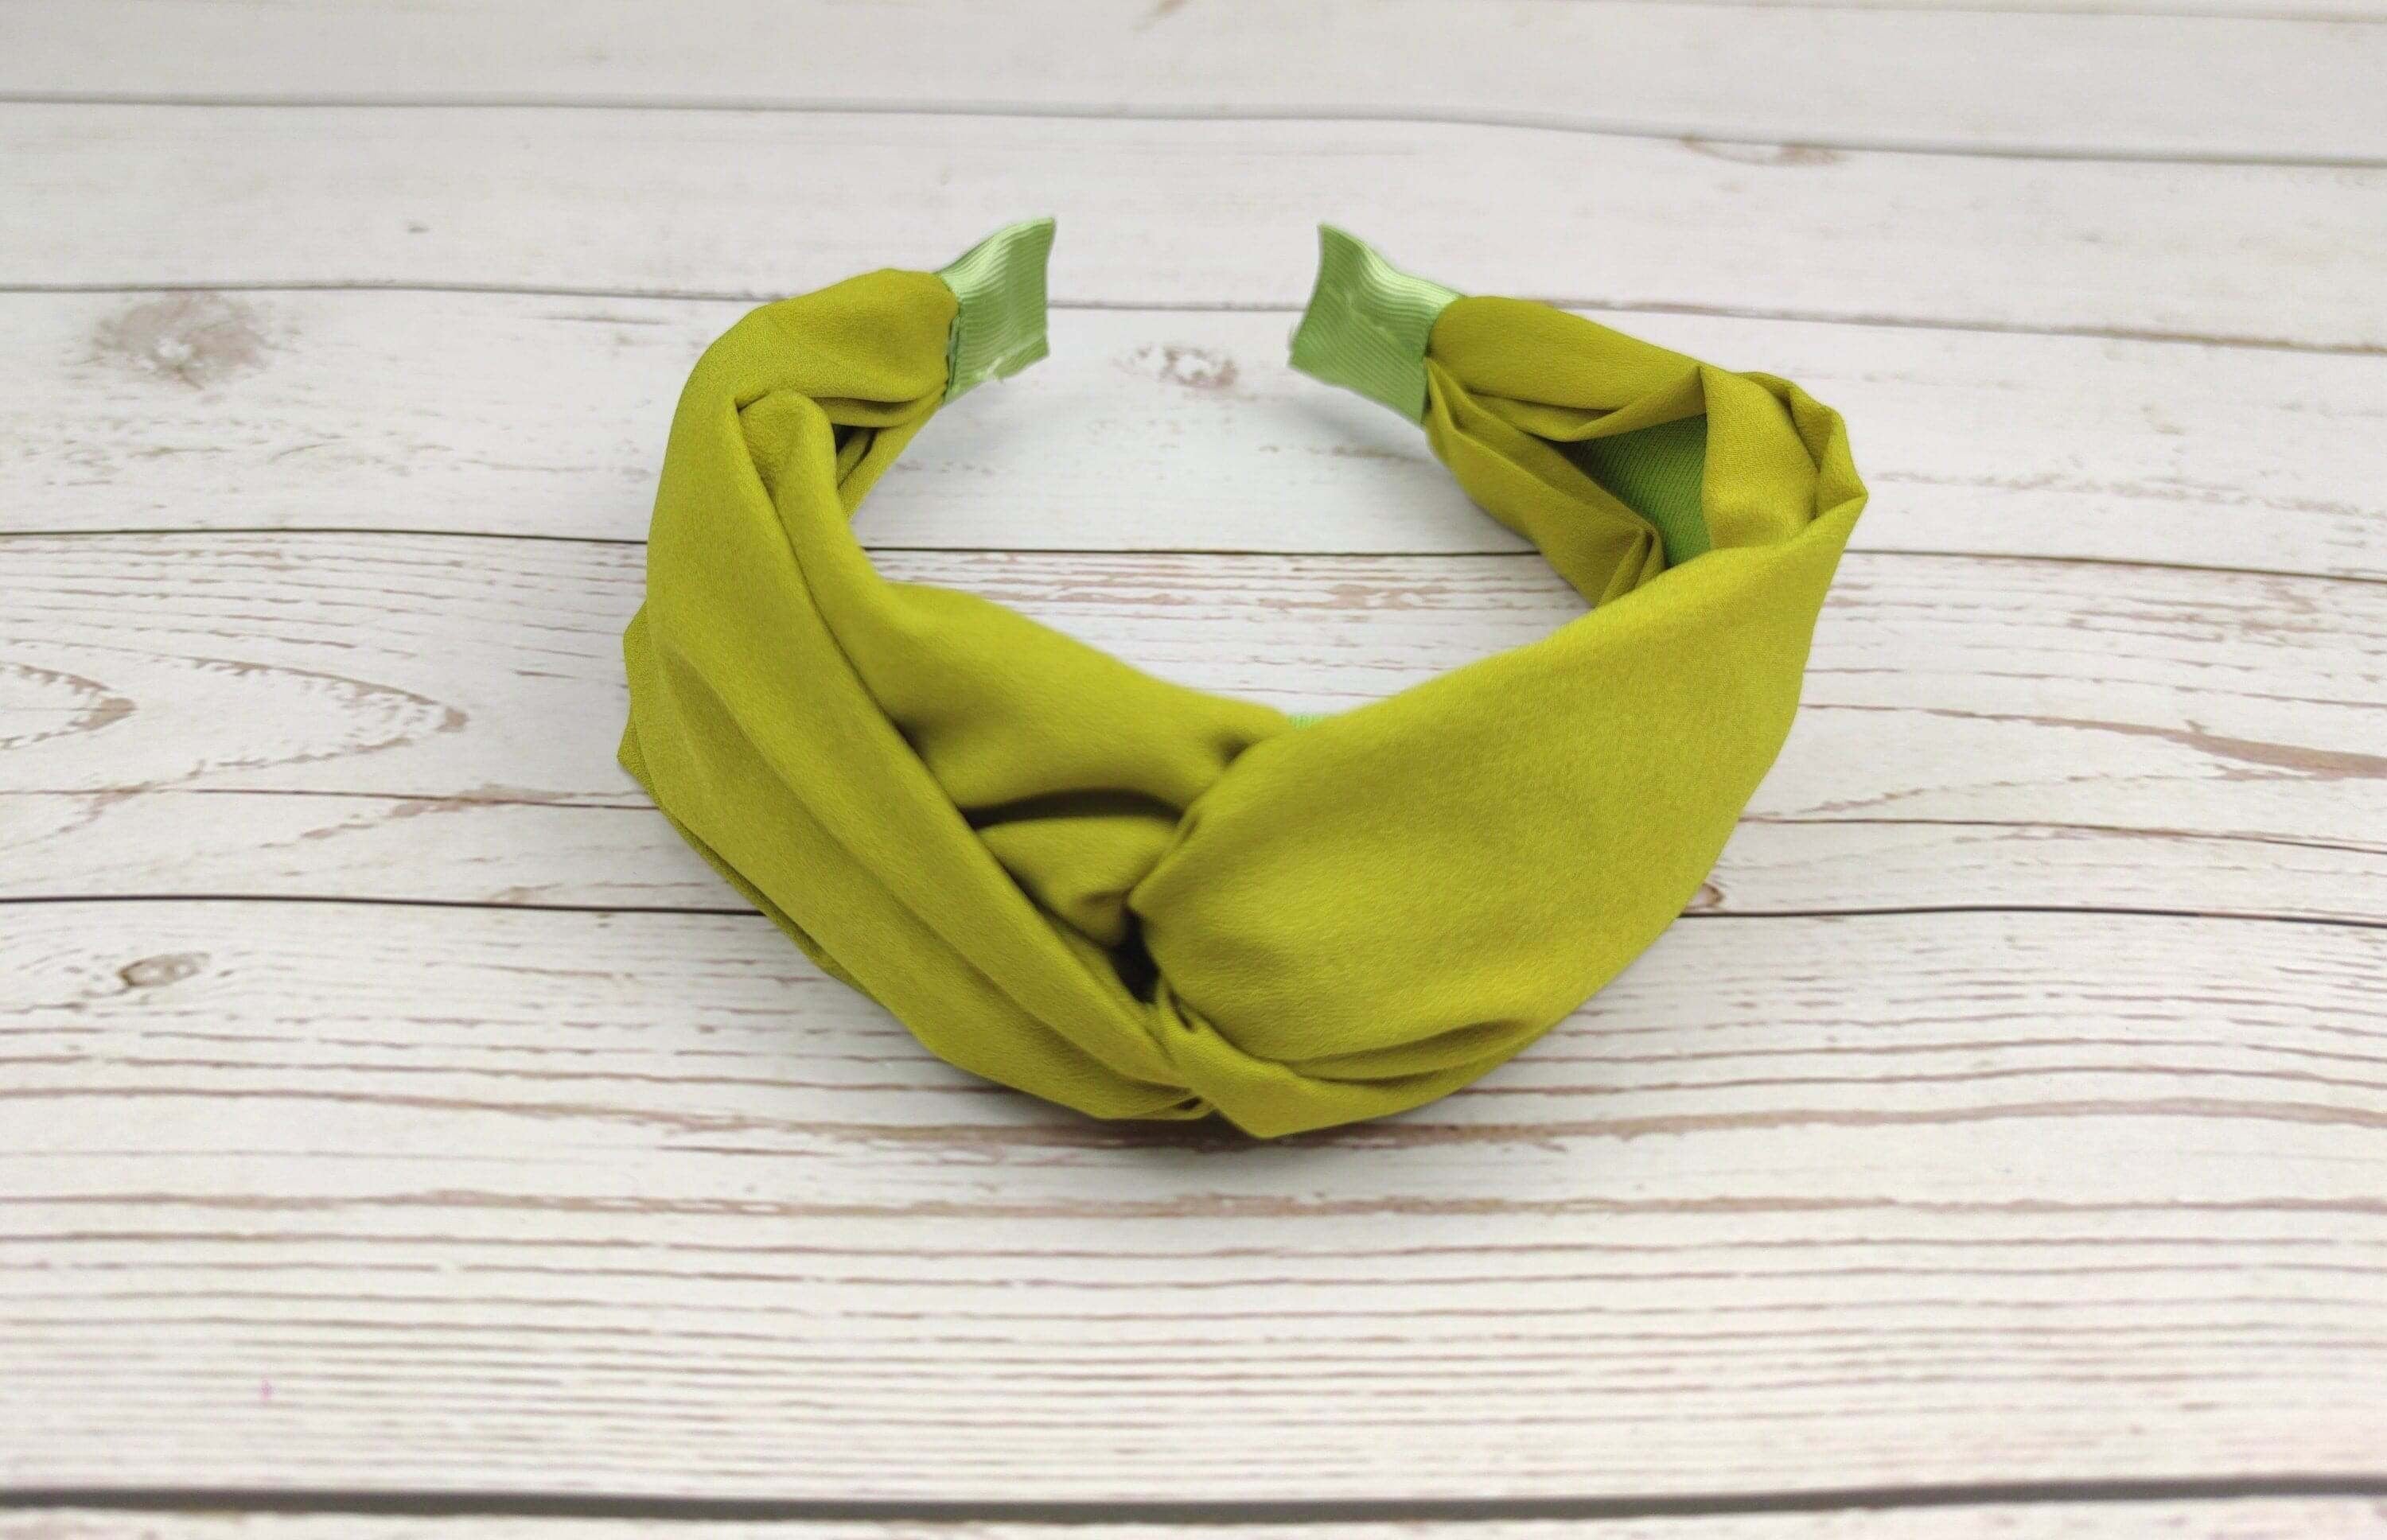 Love making your own accessories? Take a look at the Handmade Headband by Green Headband Studio. This headband is made from 100% cotton yarn and features an easy-to-